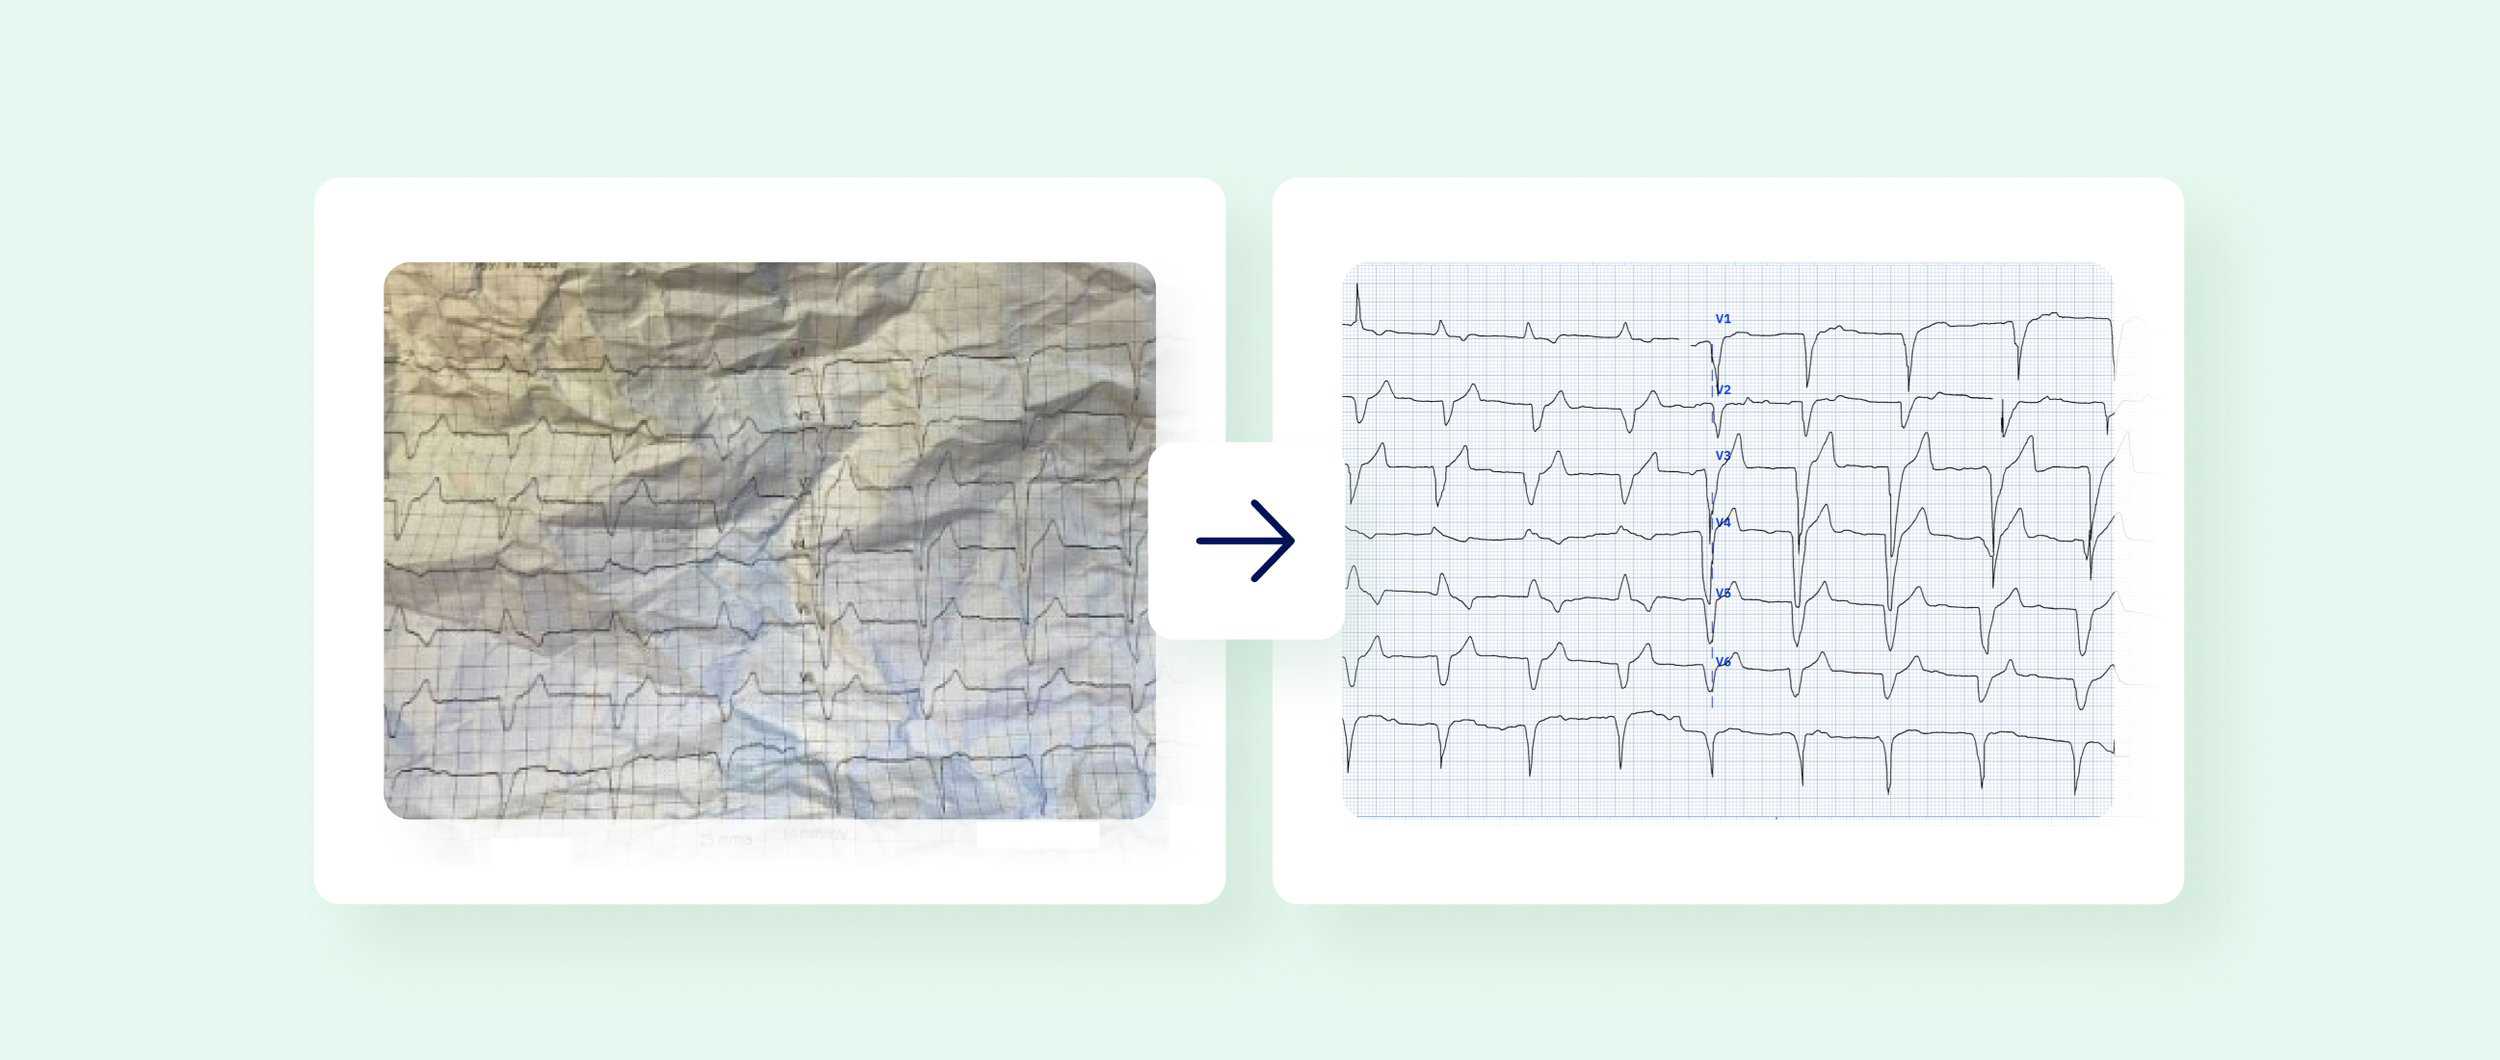 An image of a crumpled, poor-quality ECG and next to it a corrected ECG recording digitized by PMcardio